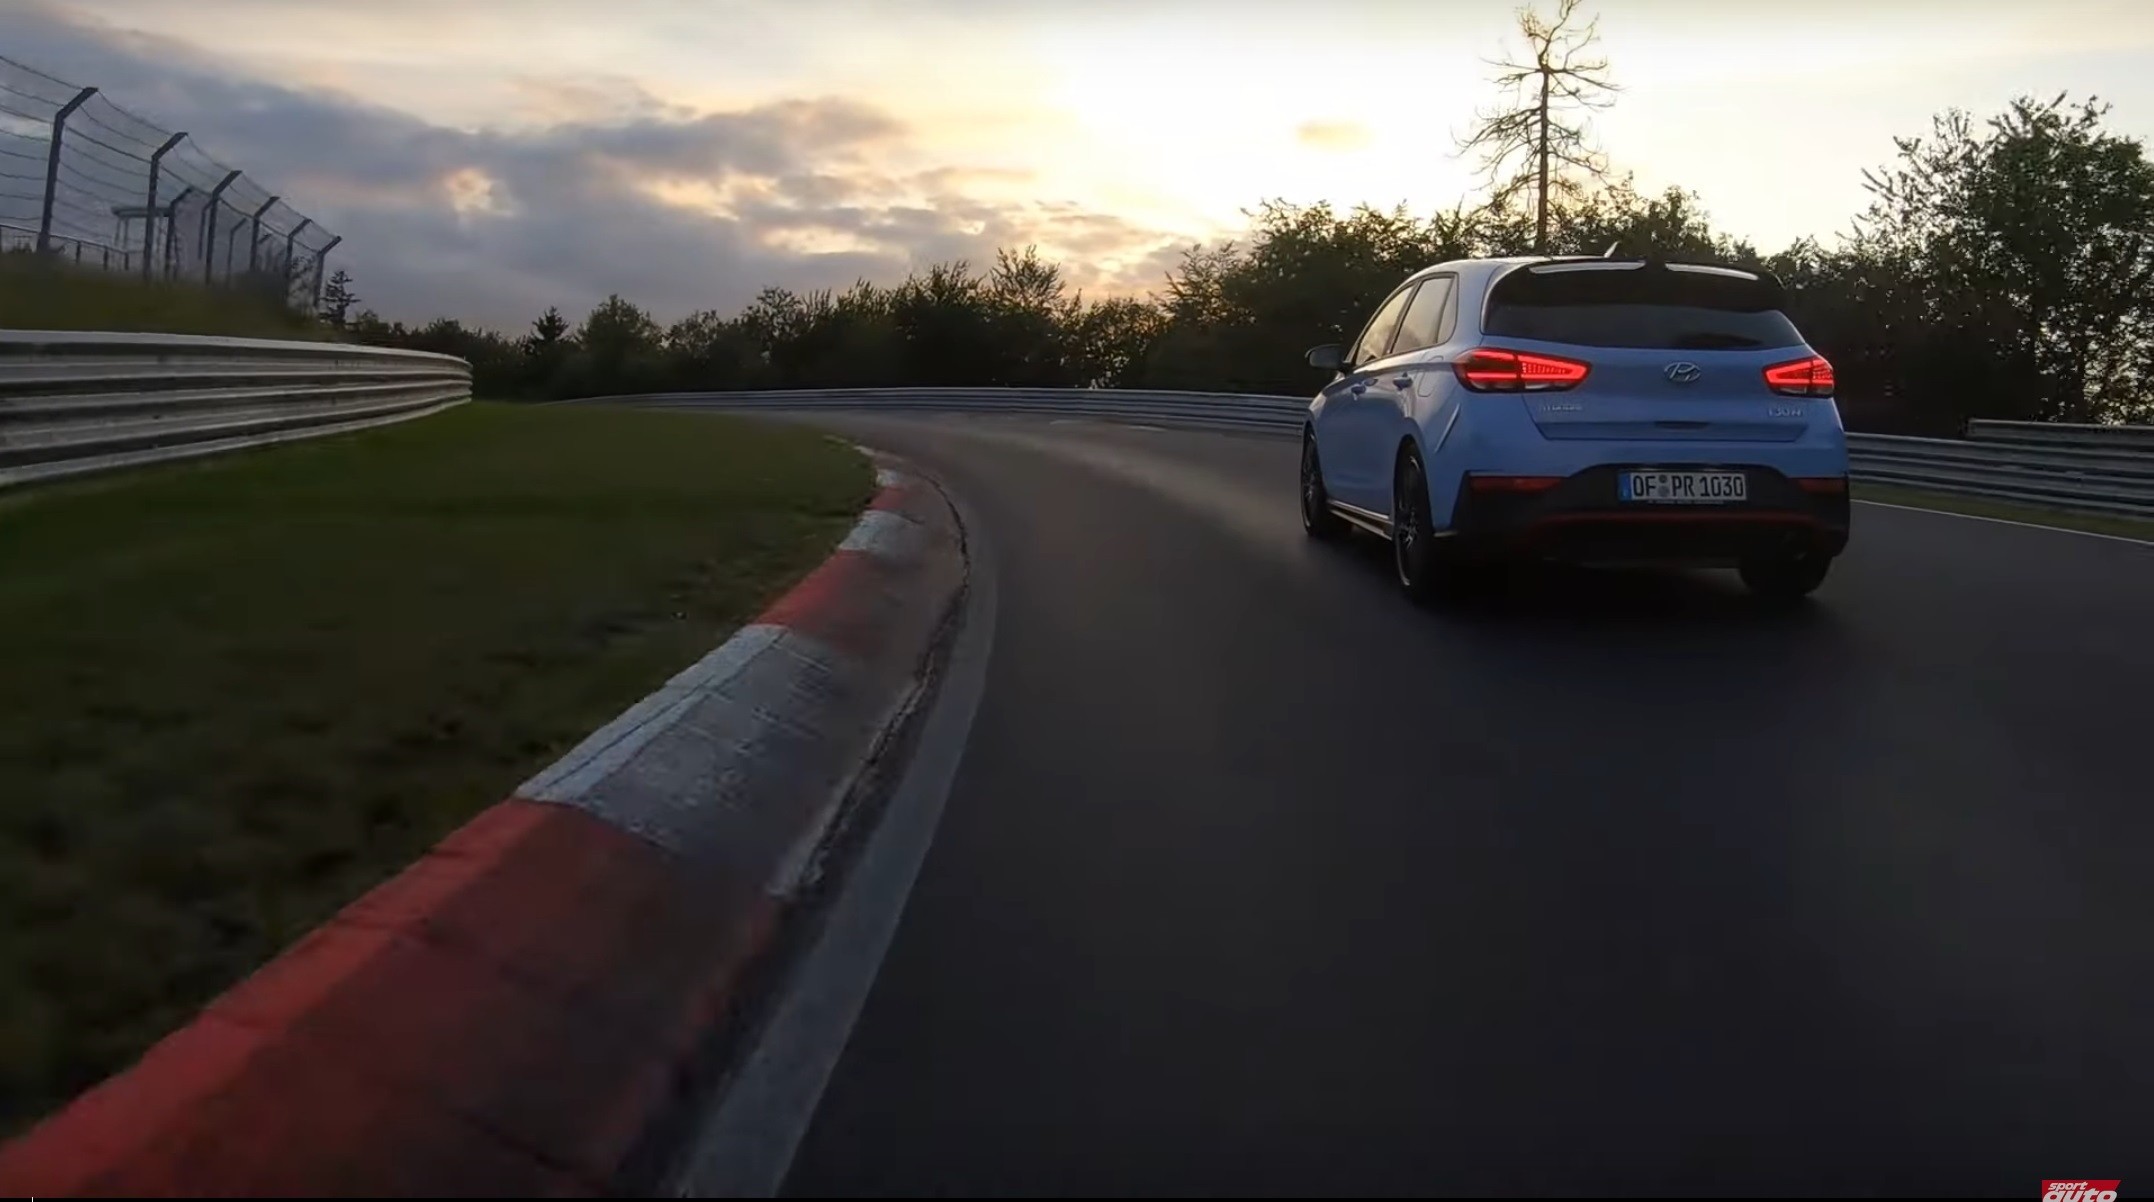 Hop Onboard Hyundai i30 N Performance For A Fast Nurburgring Lap